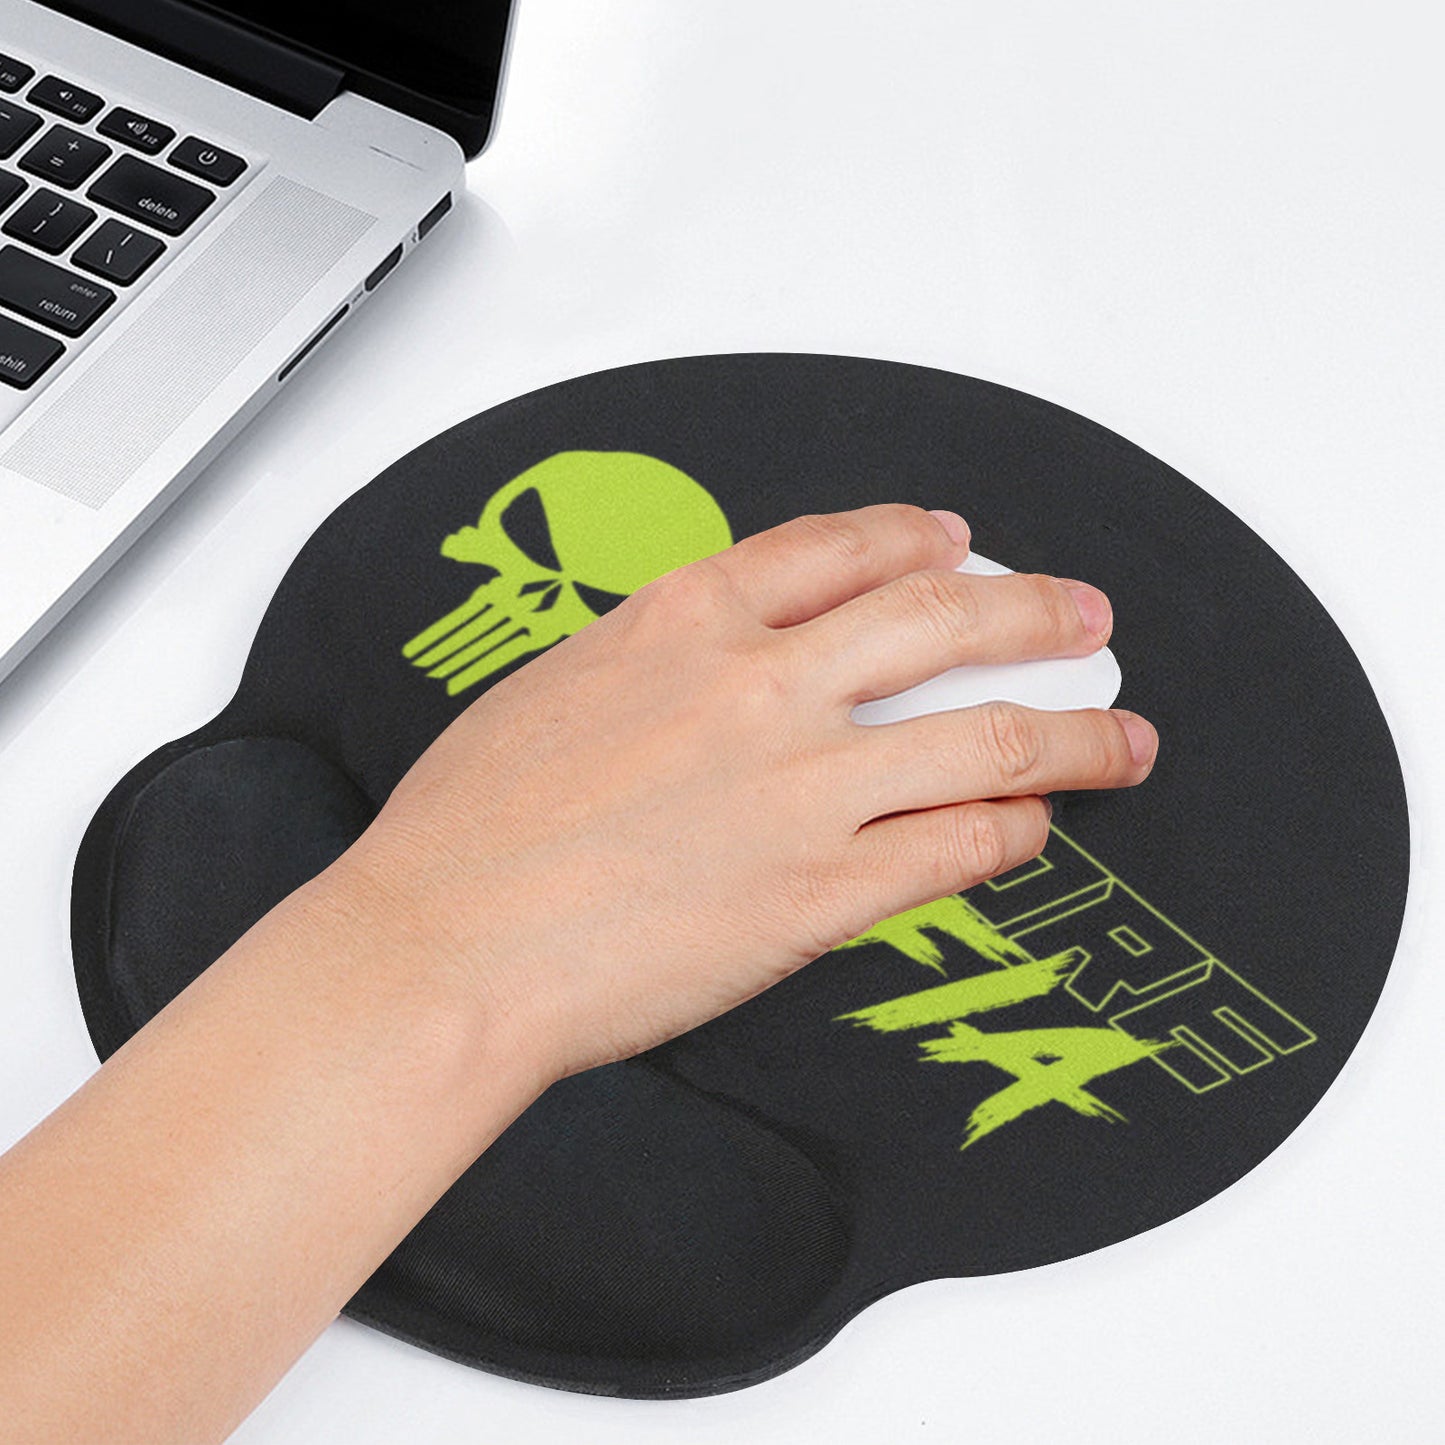 Moore Mafia Mouse Pad Wrist Support Mouse Pad with Wrist Rest Support